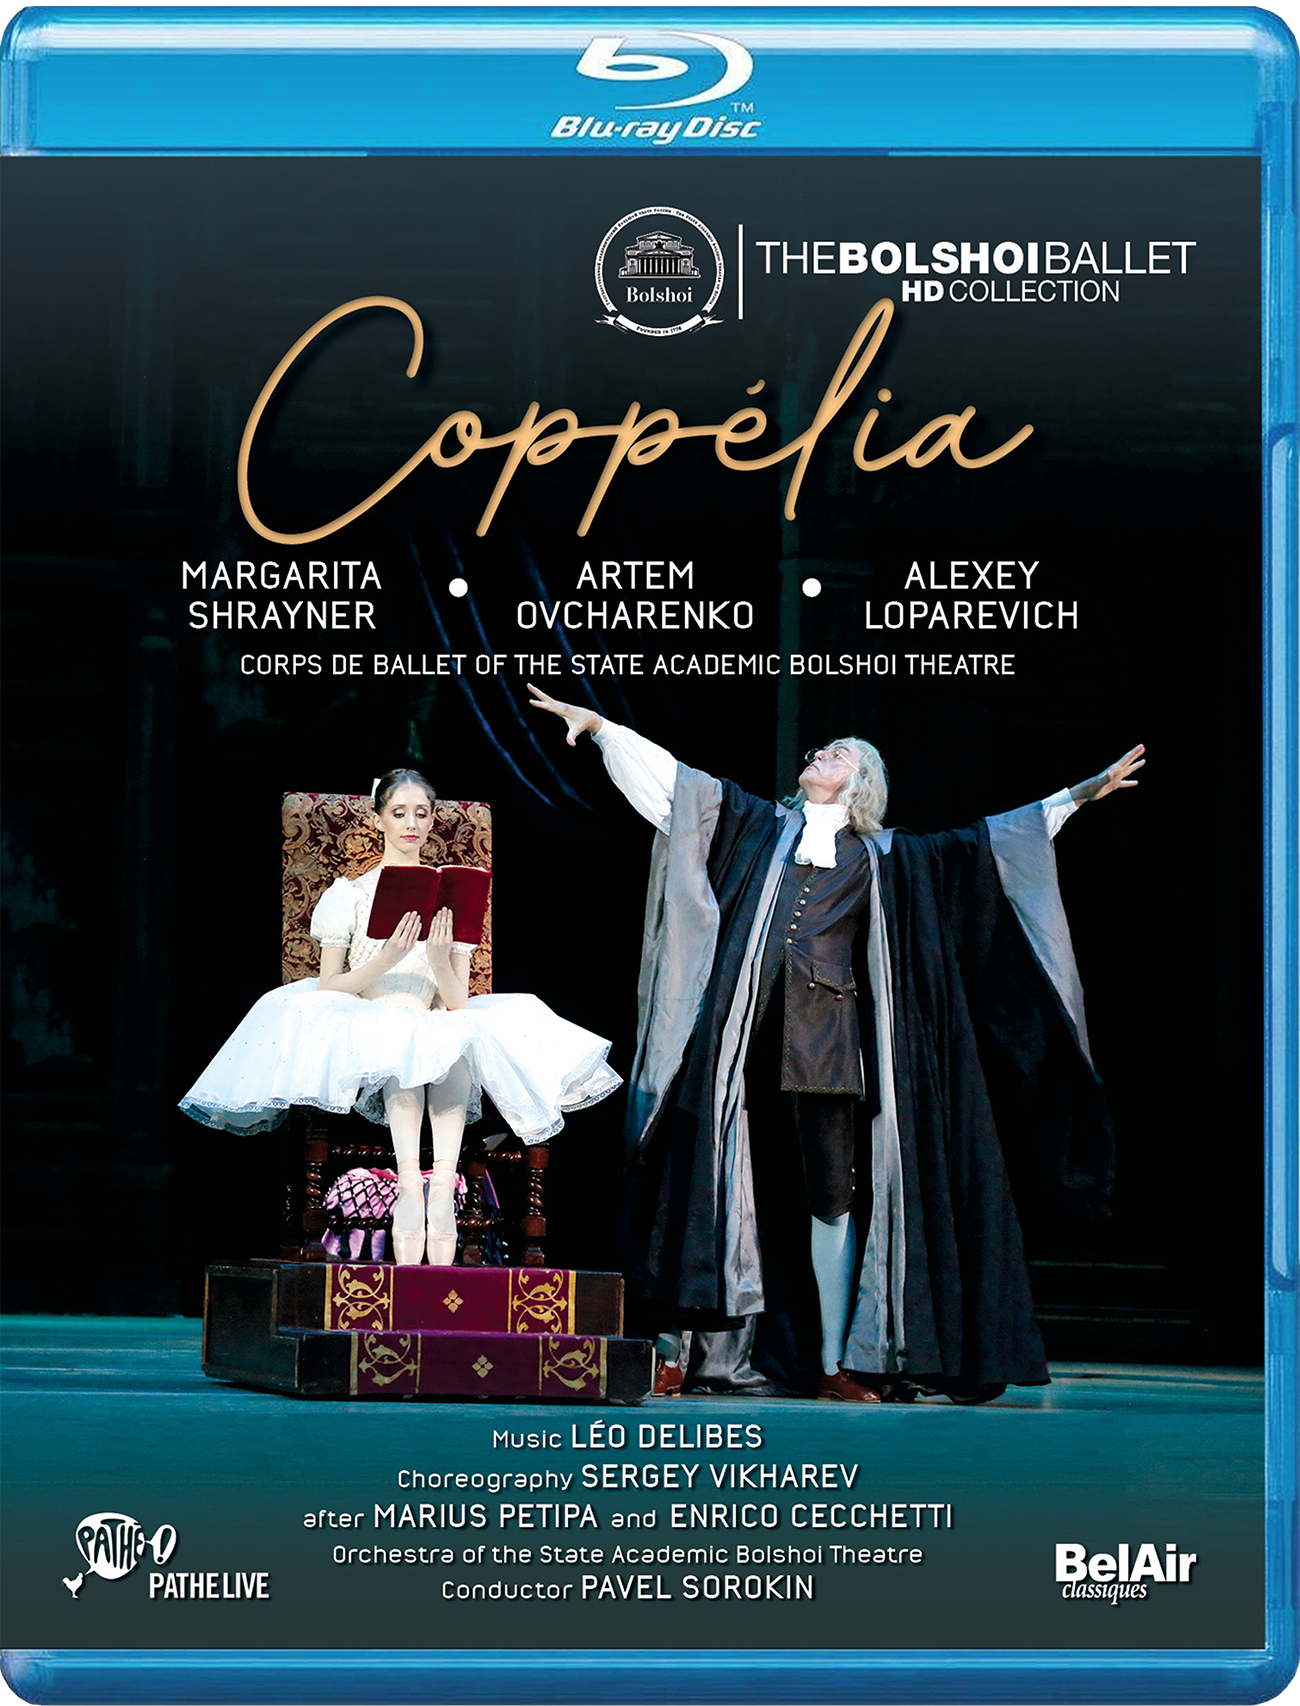 bac463-coverbluray-coppliarecto.png